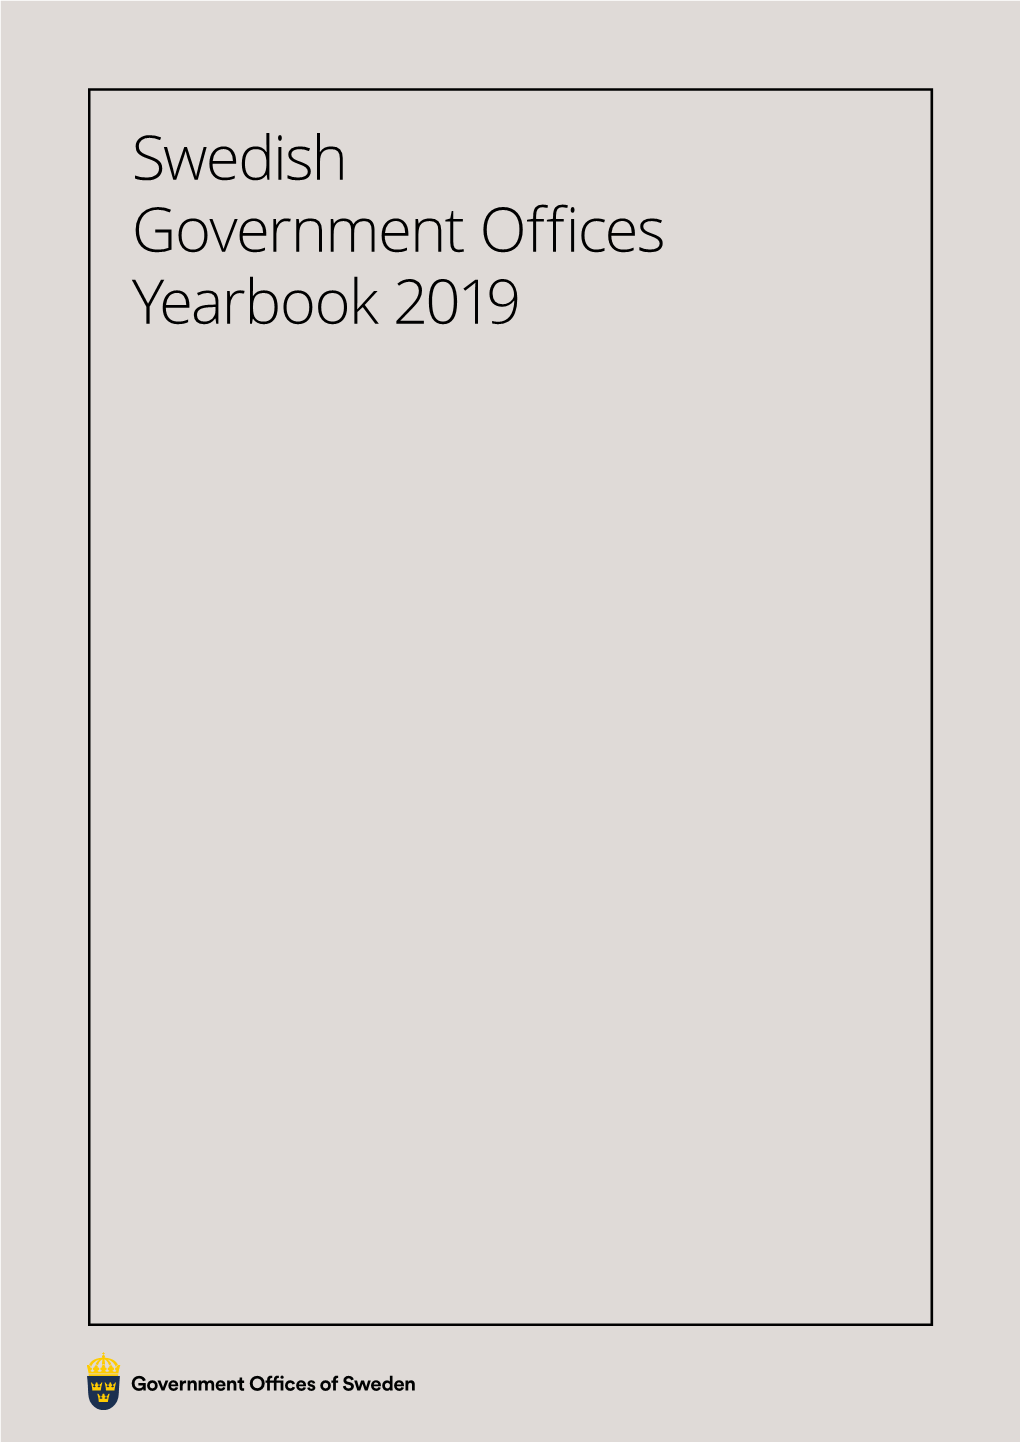 Swedish Government Offices Yearbook 2019